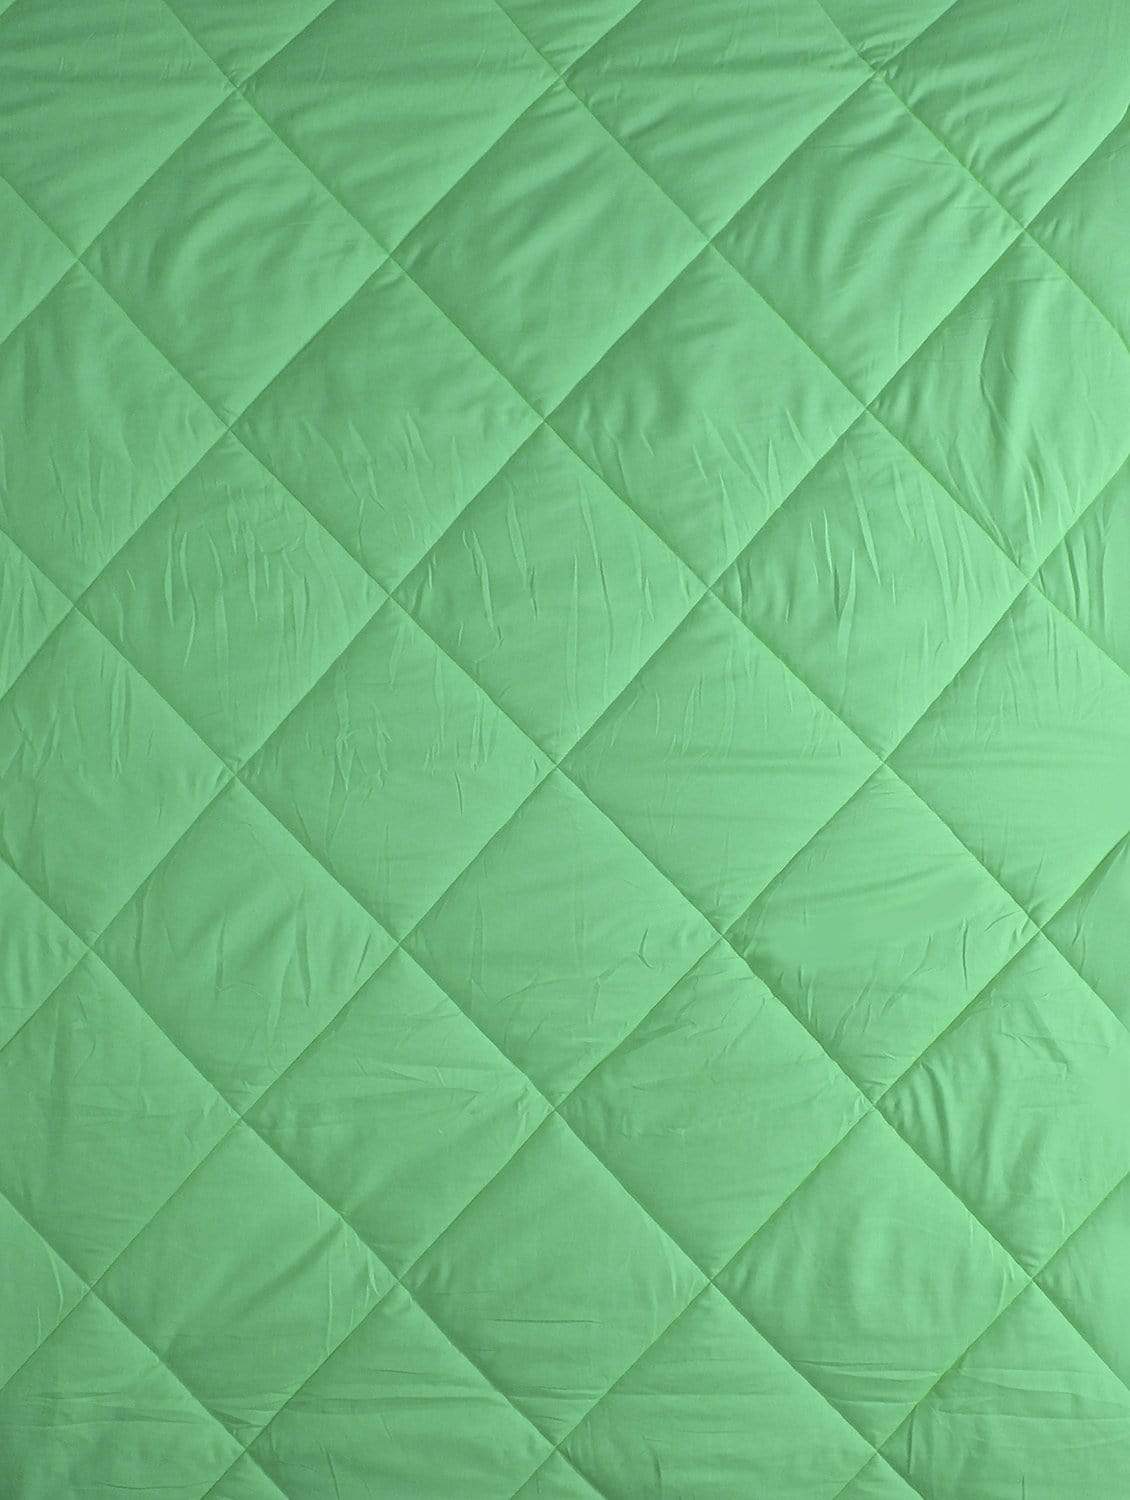 Fusion Soft Green & Red Dual Color Comforter Single Size - 150 cm X 225  cm